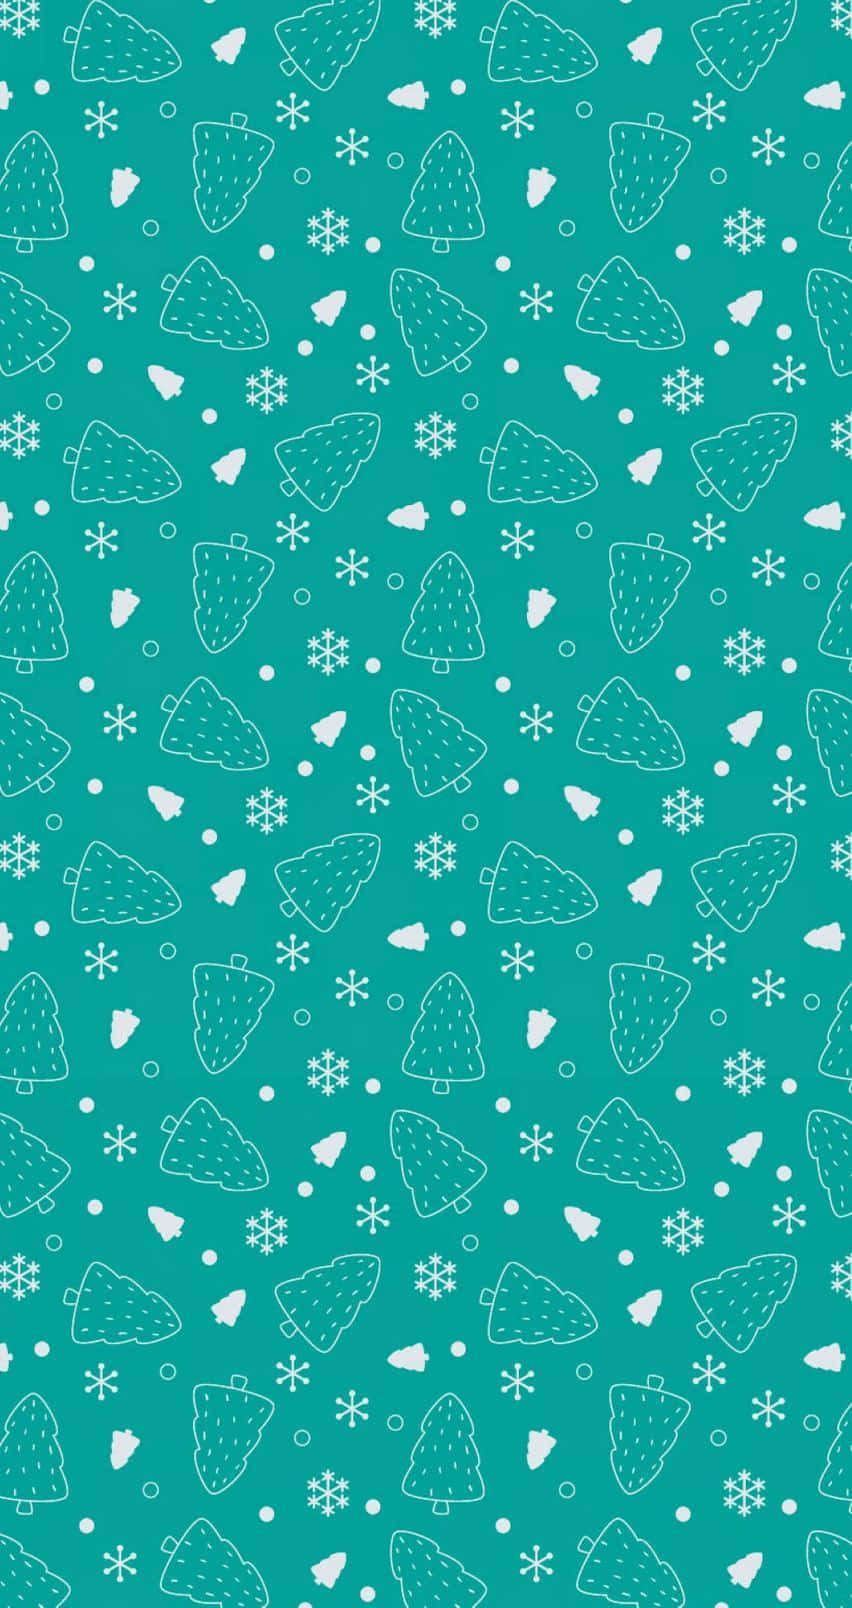 Get the look you love with a gorgeous Turquoise iPhone Wallpaper